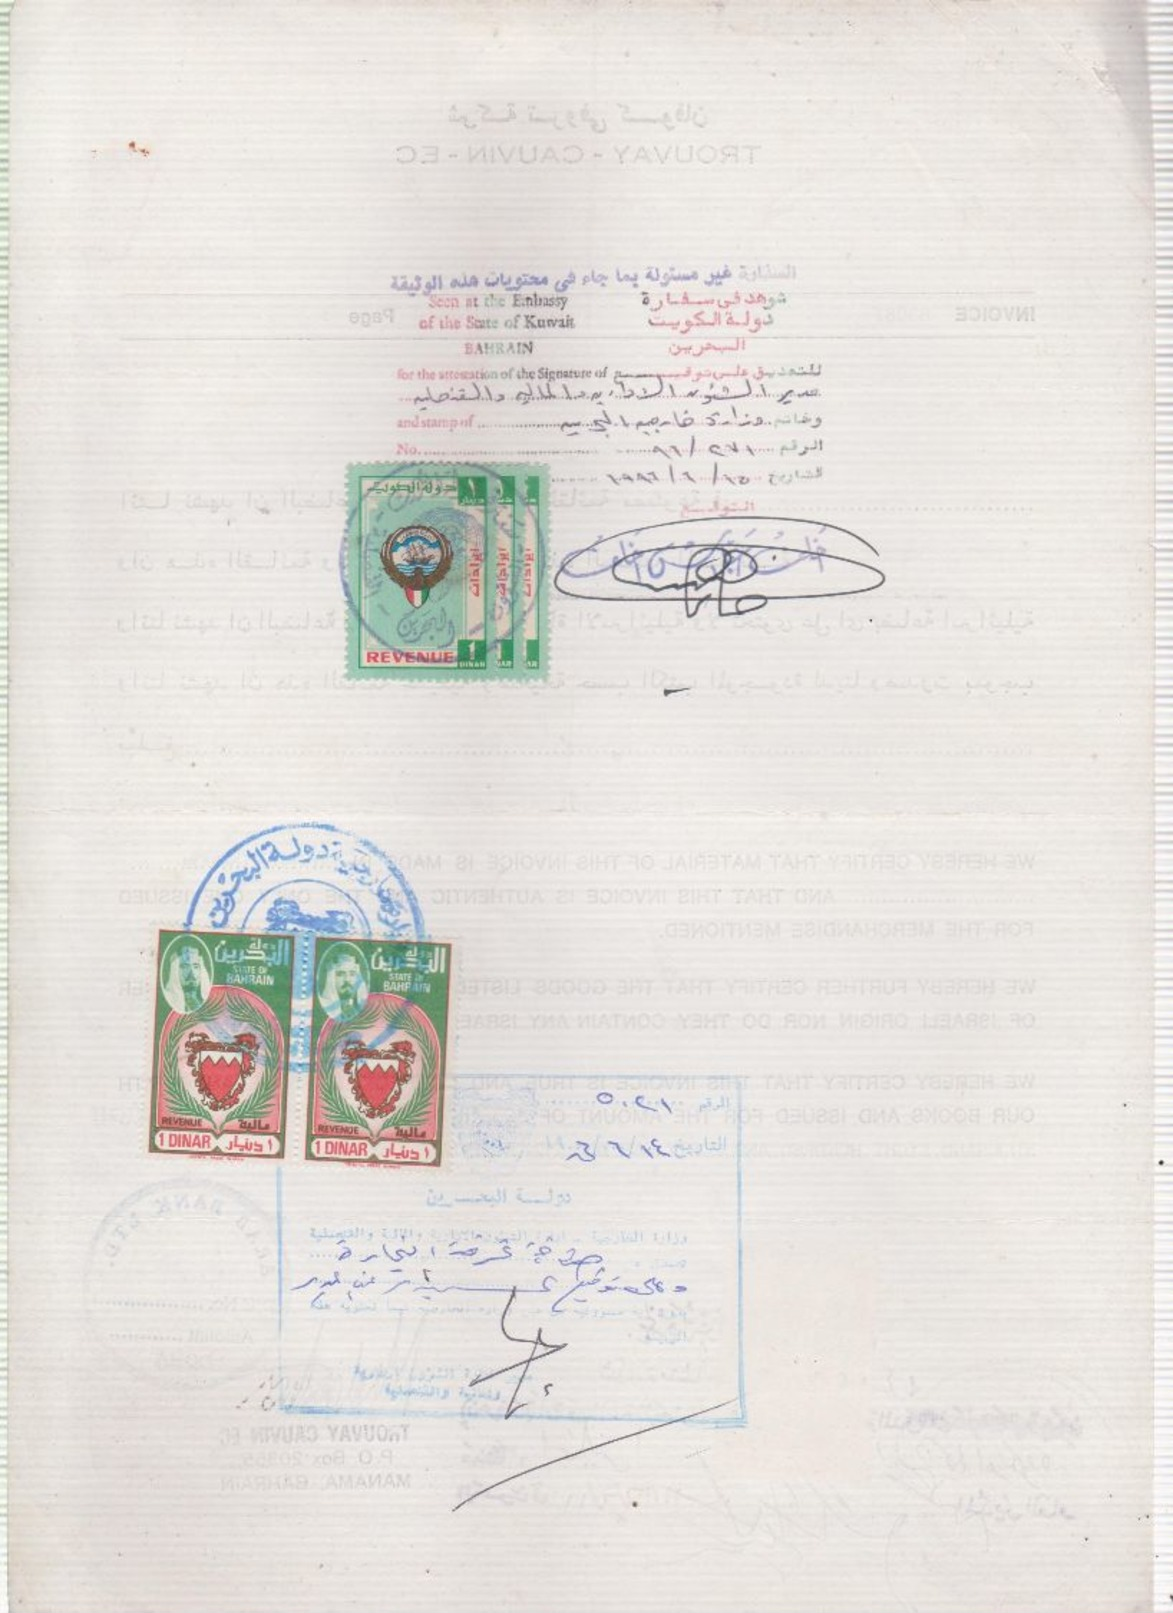 QATAR NICE REVENUE STAMP IN DOCUMENT ALONG WITH BAHRAIN  REVENUE STAMP  2 SIDES - Qatar